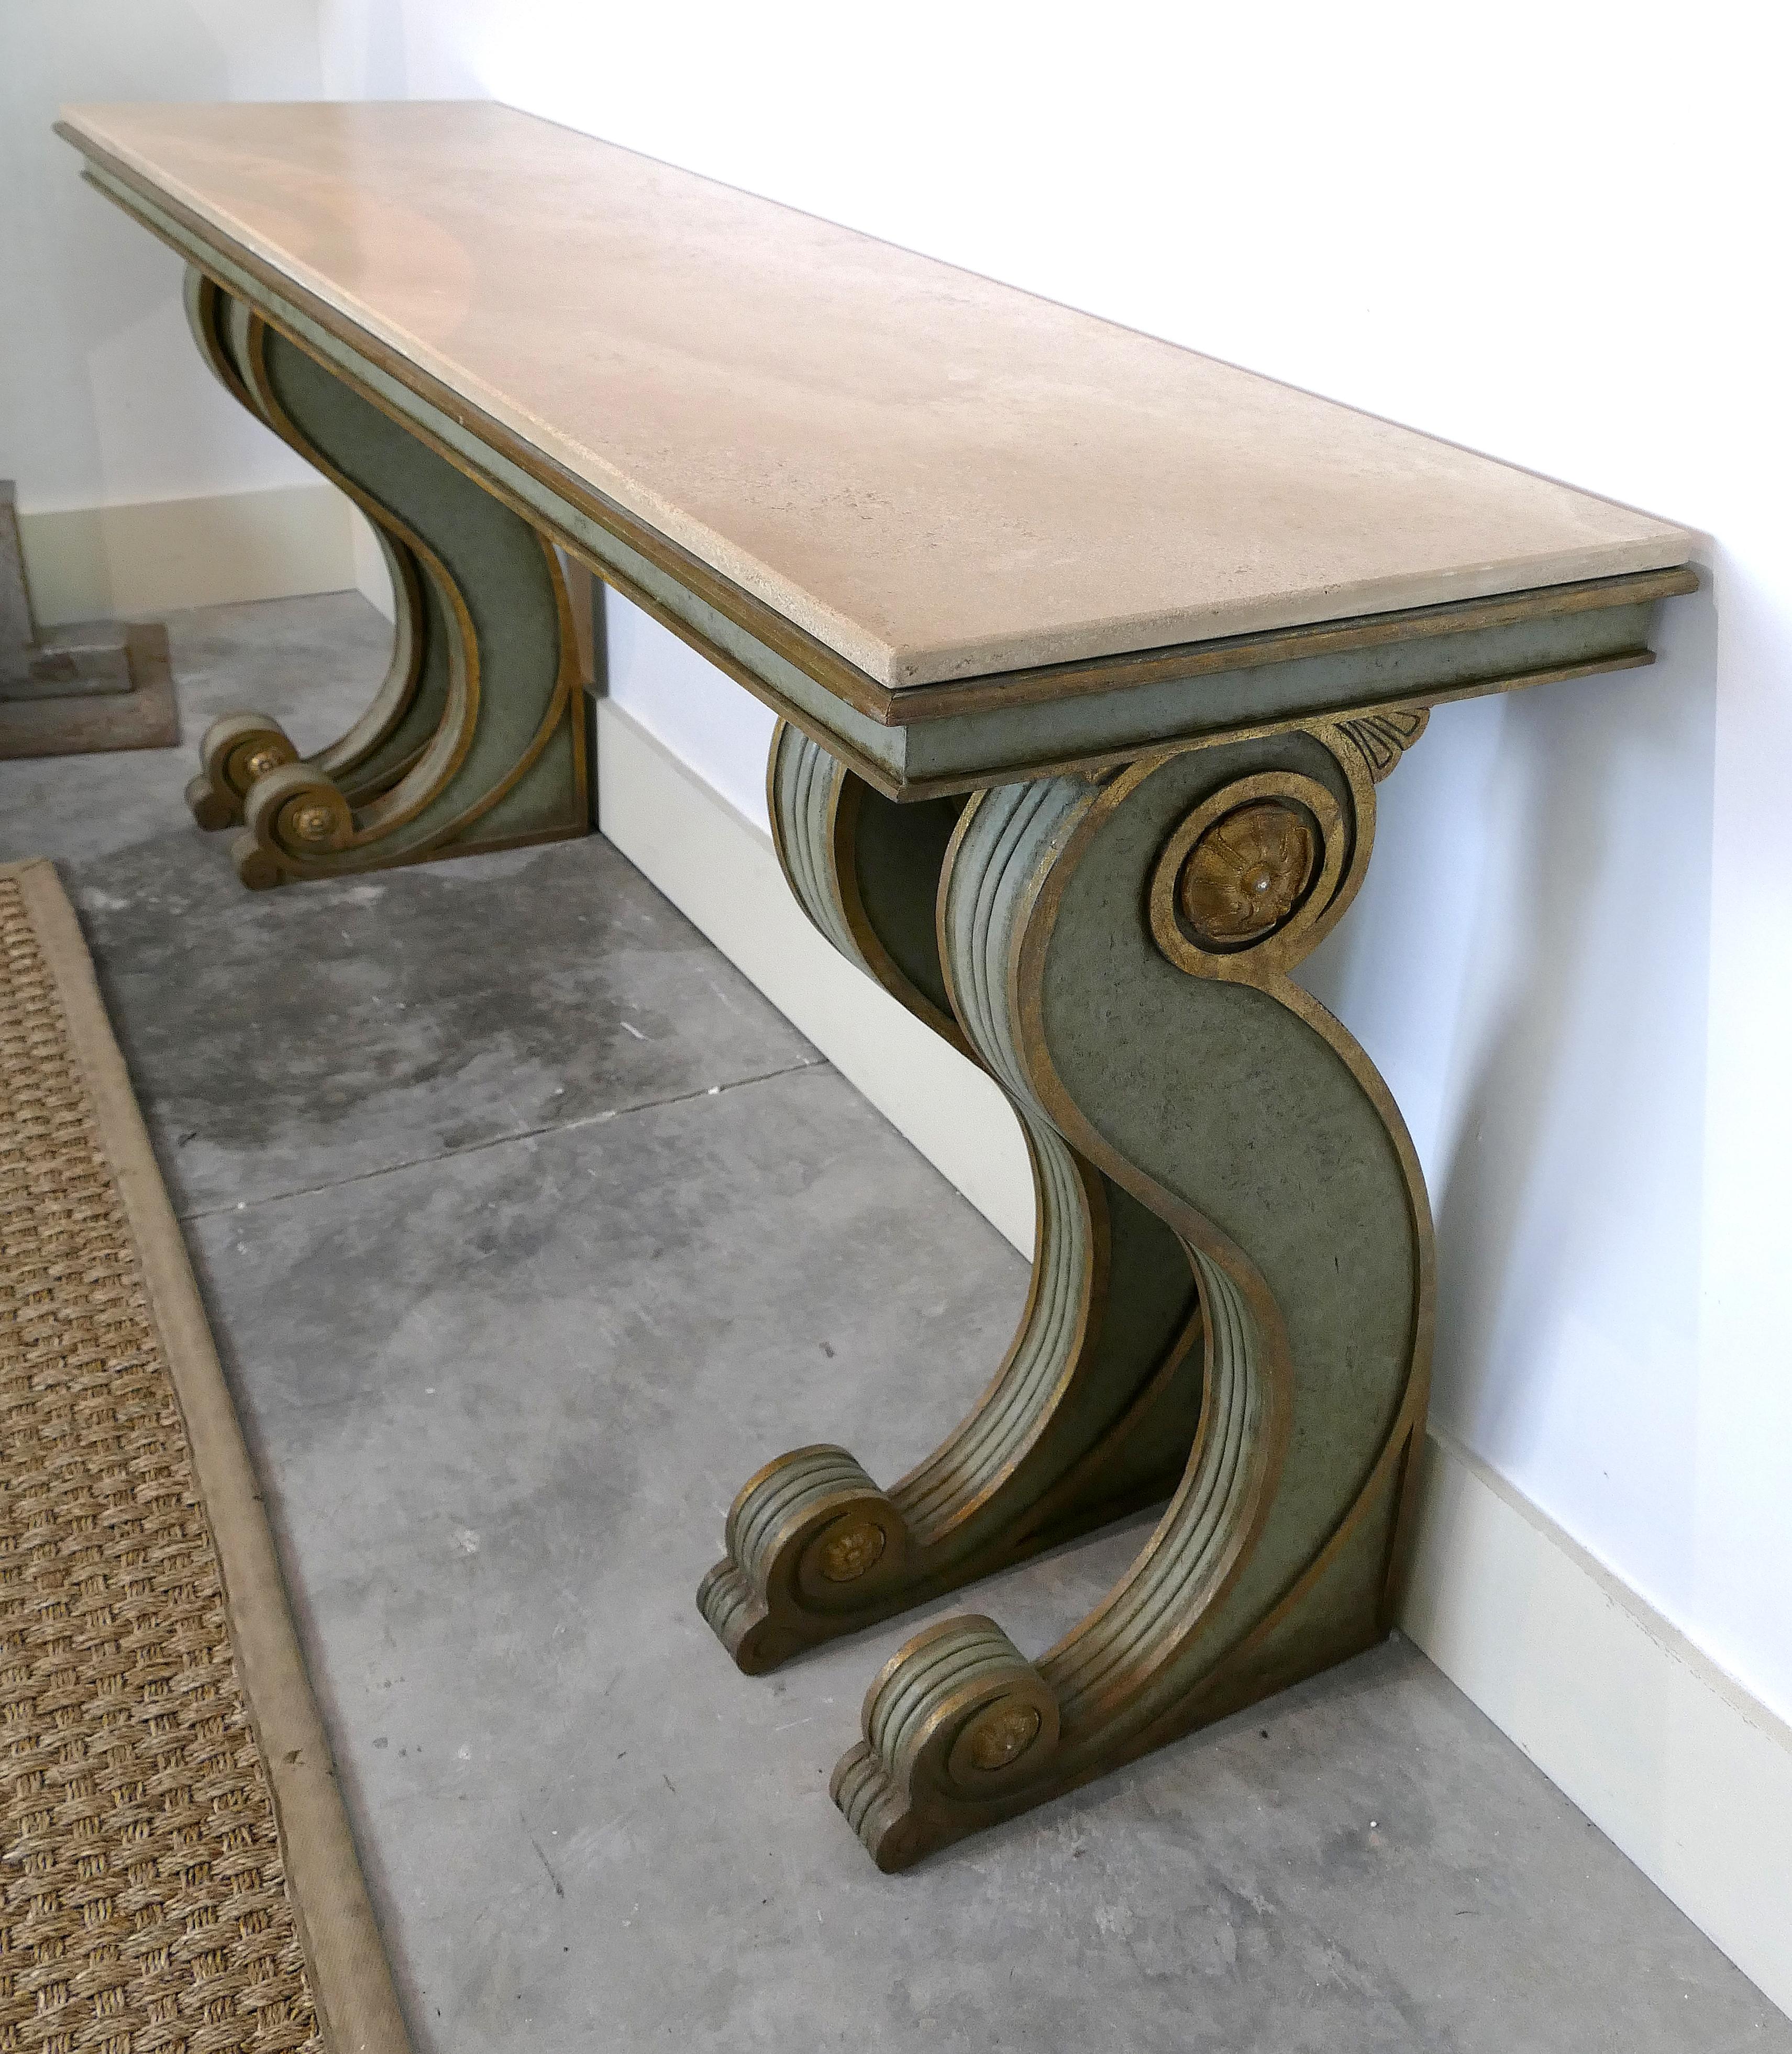 Niermann Weeks neoclassical style console with a Travertine top

Offered for sale is an Impressive overscaled neoclassical style console by Niermann Weeks. This substantial hand carved wooden console is an example of fine quality craftsmanship.